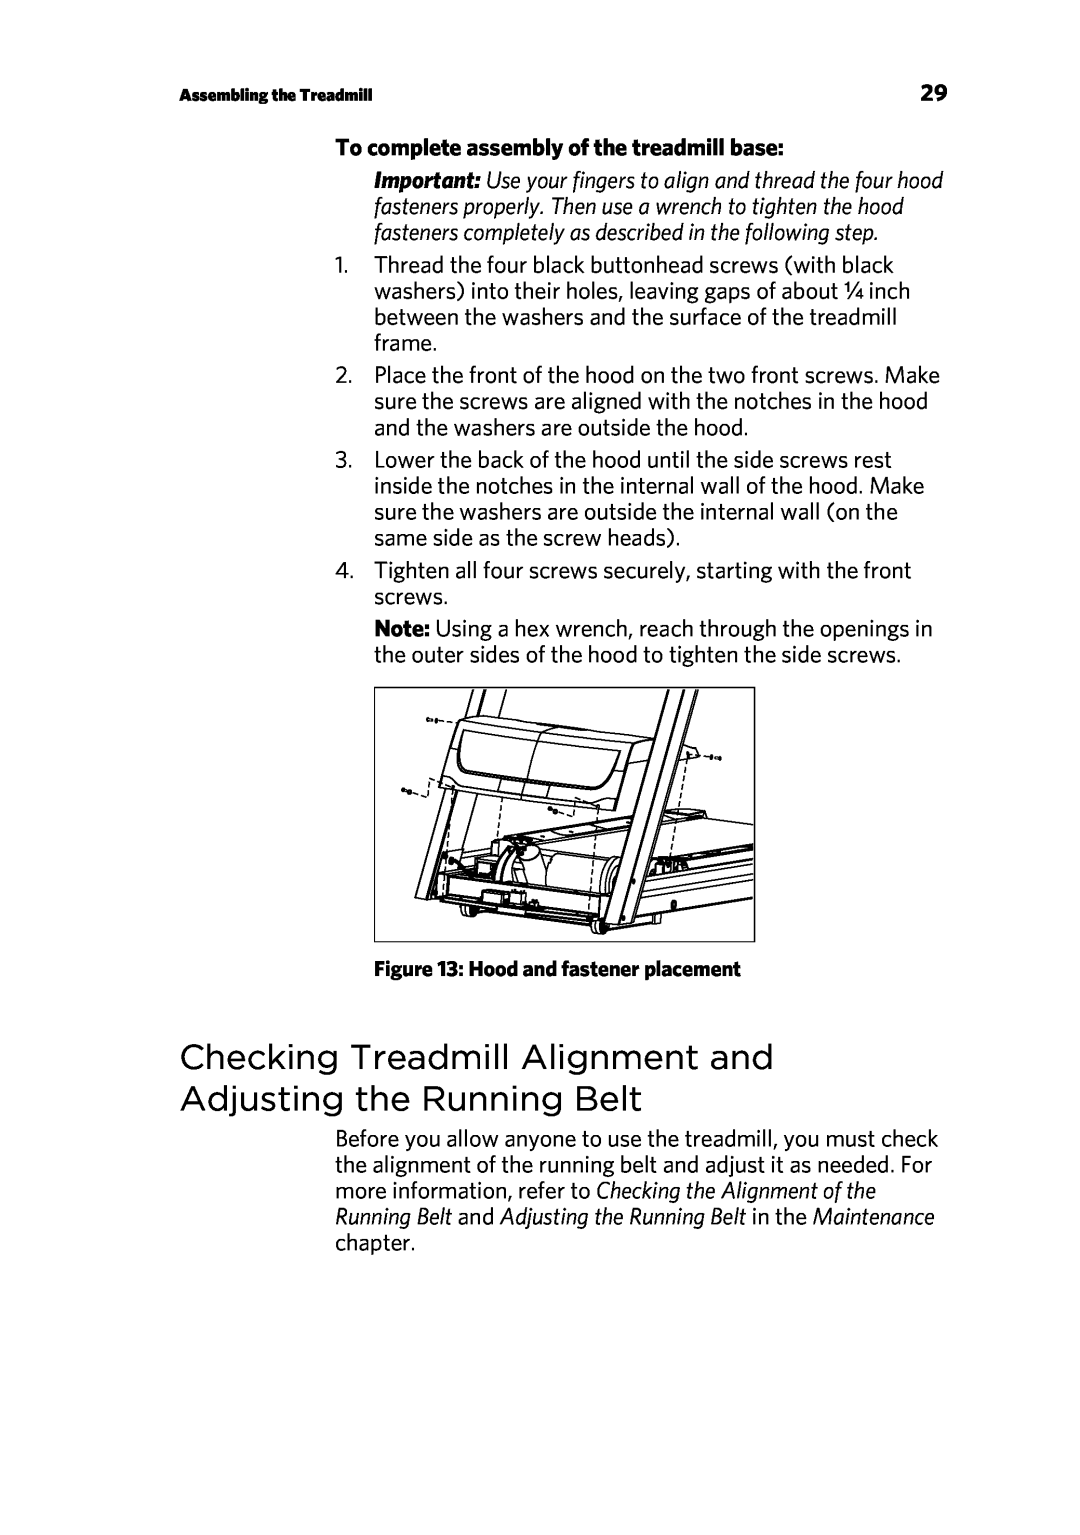 Precor P80 manual To complete assembly of the treadmill base, Hood and fastener placement 